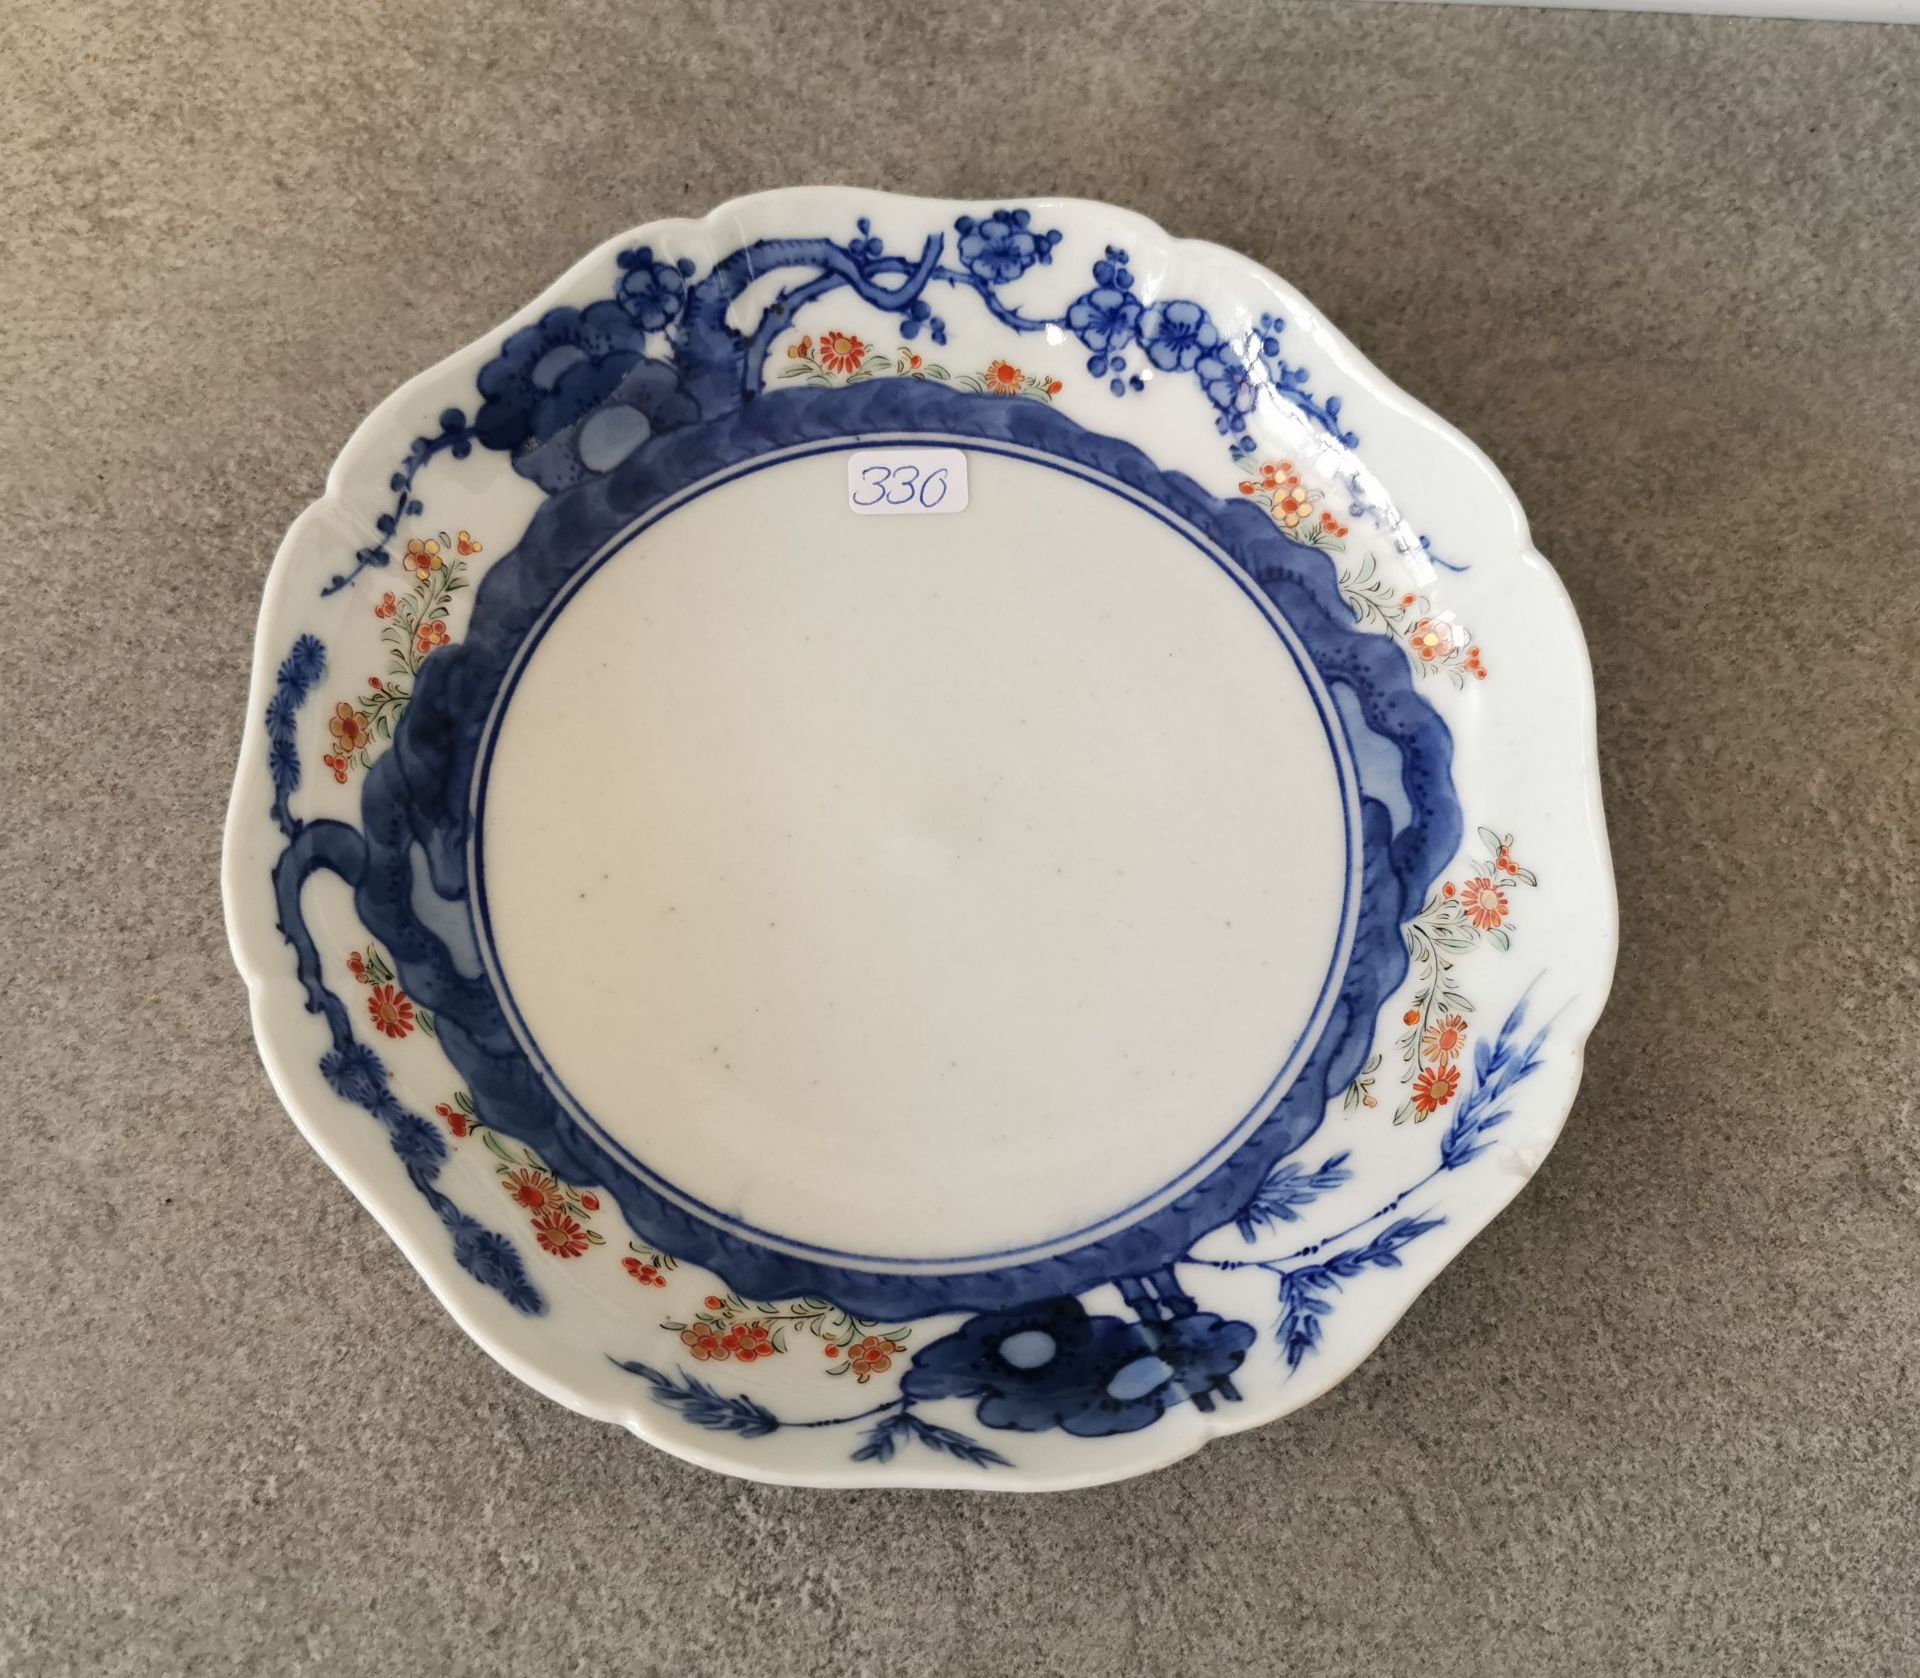 DISH / PLATE - Image 2 of 3